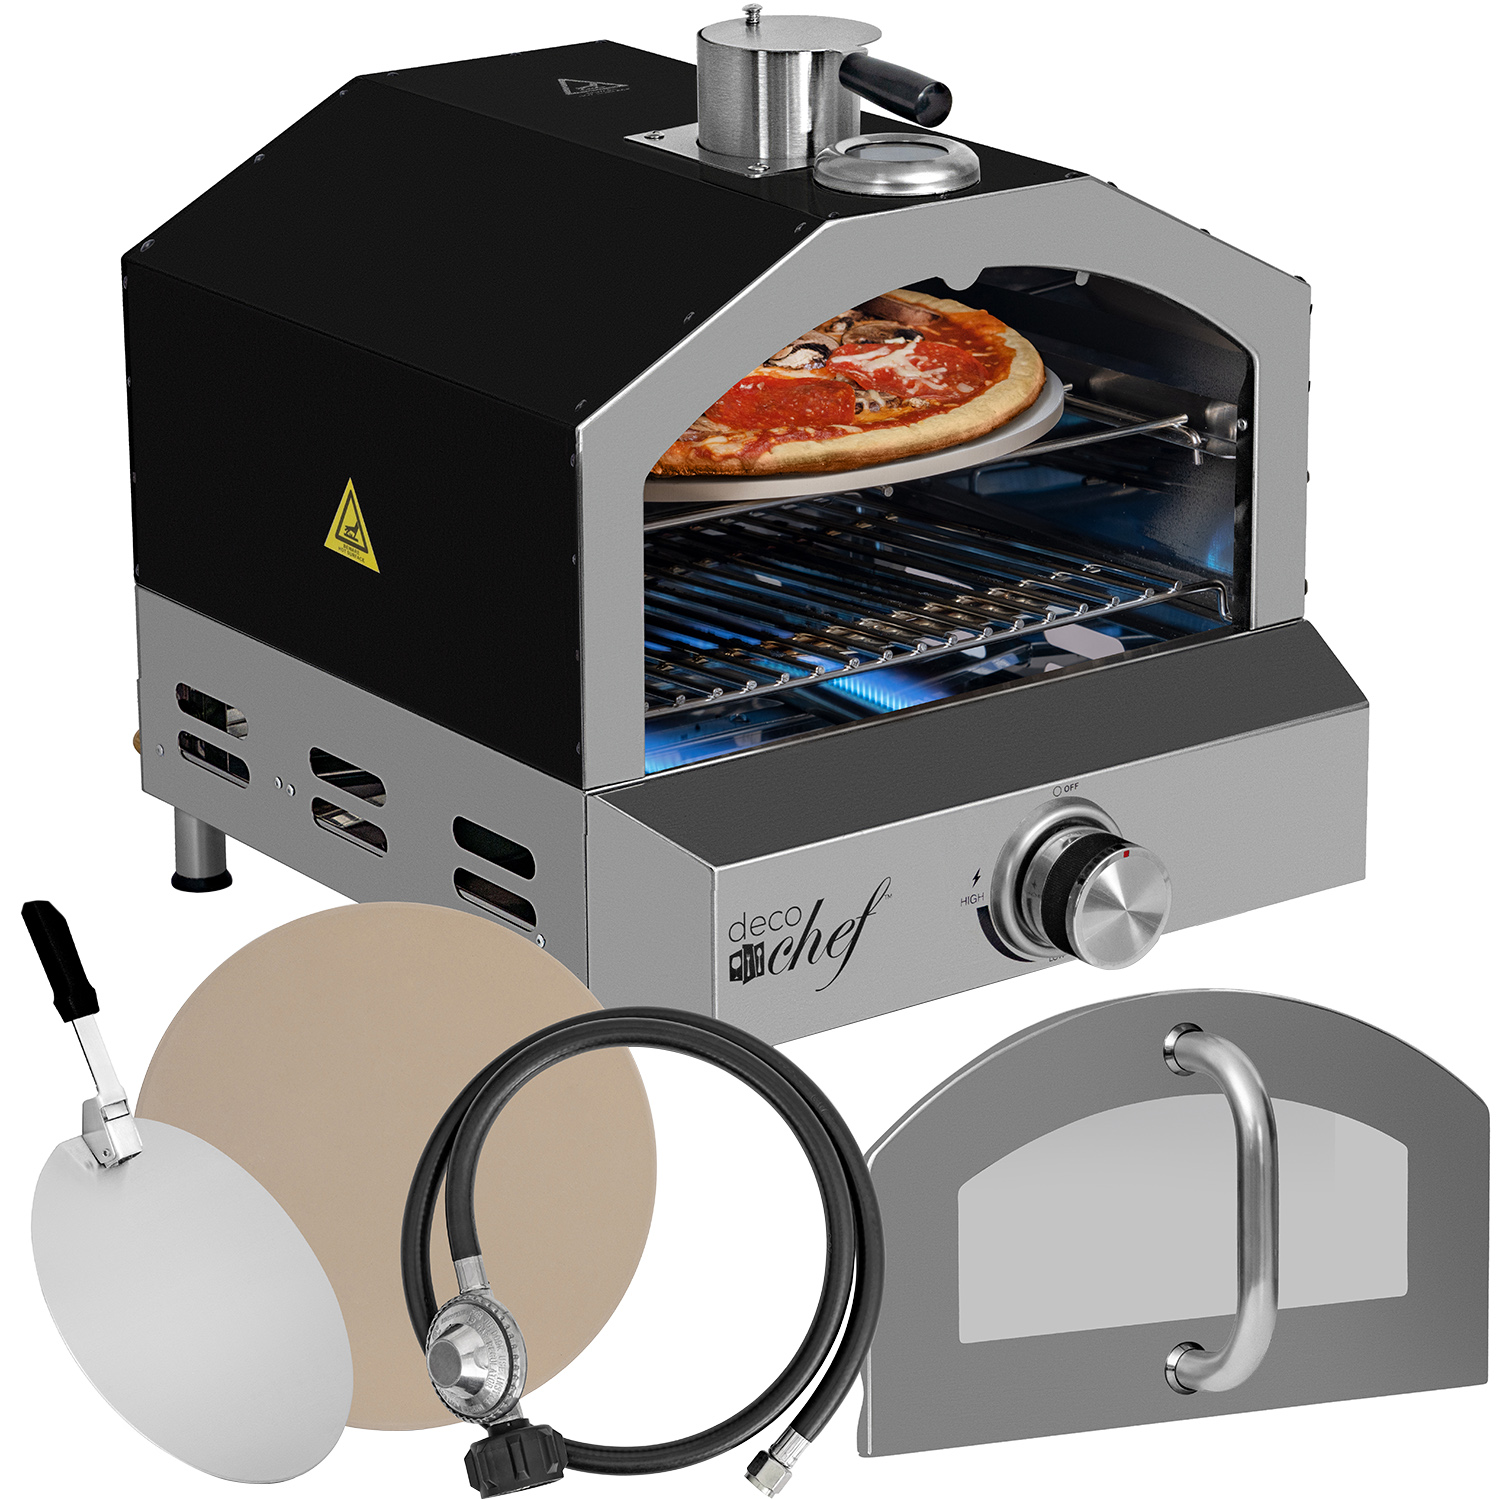 Deco Chef Portable Outdoor Pizza Oven and Grill with Propane Gas CSA Approved Regulator and Hose, Includes Pizza Peel, Stone, Built-In Thermometer, and Grill Rack, Black - image 1 of 11